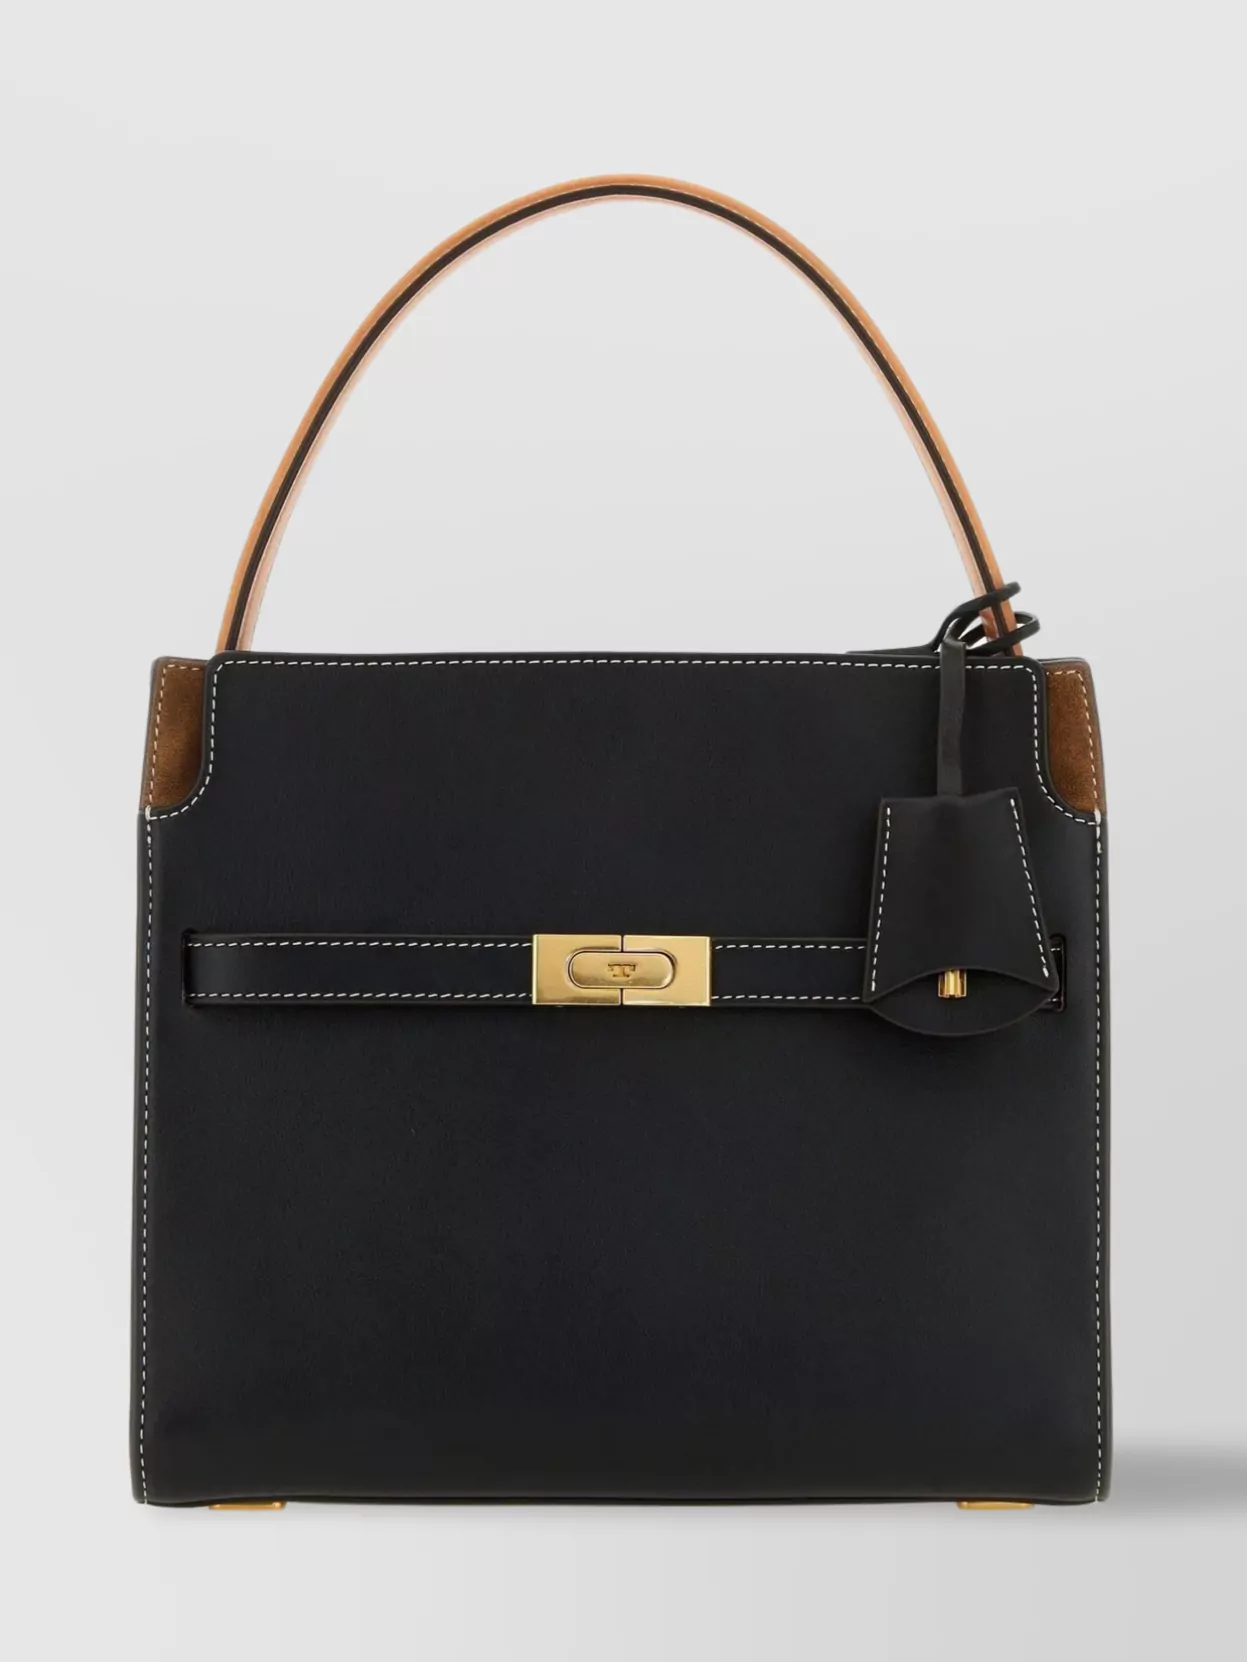 Tory Burch Double Lee Radziwill Leather Shoulder Bag In Black